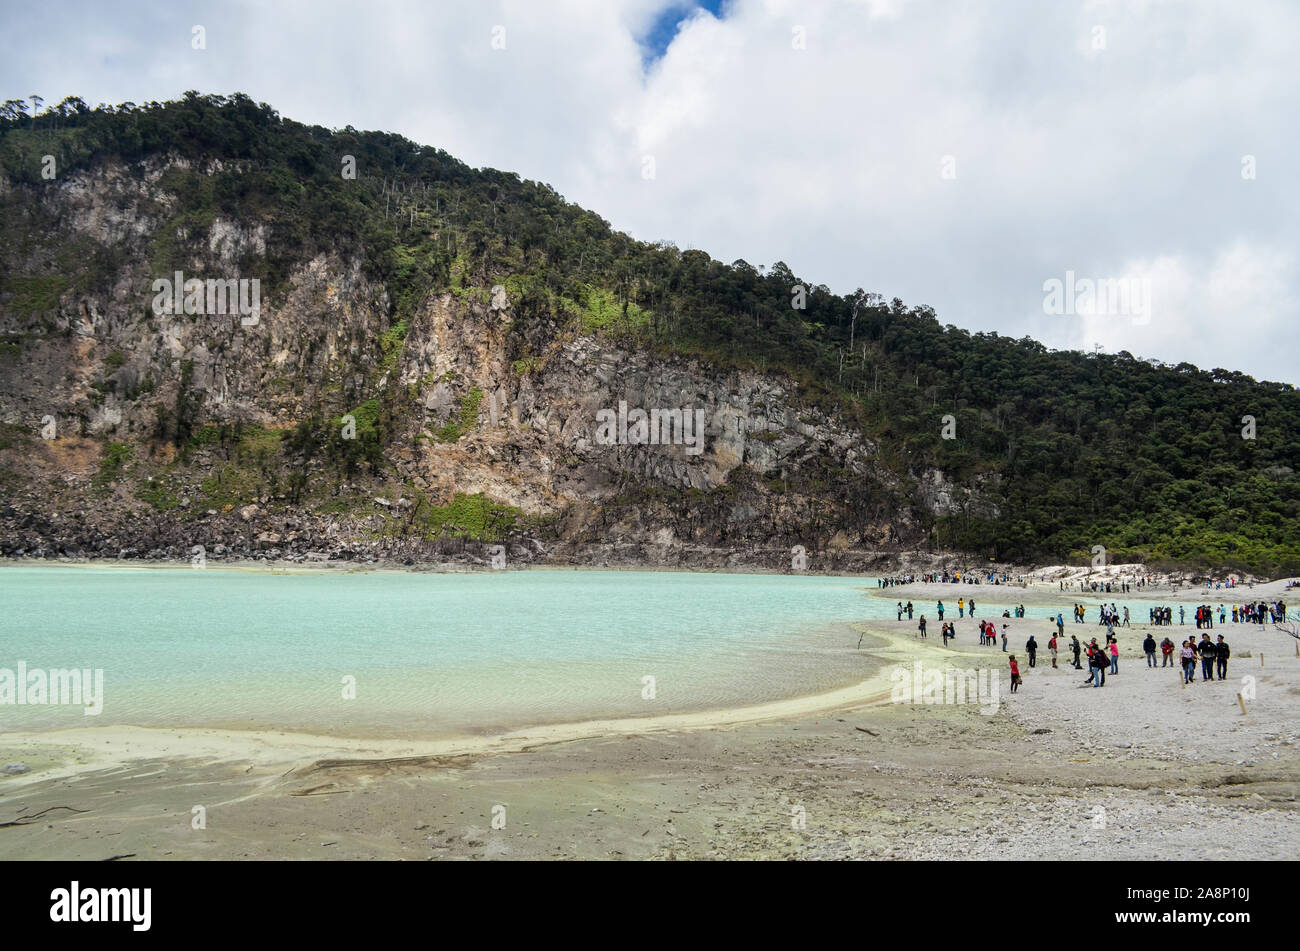 White Crater or known as 'Kawah Putih'. One of the tourist destination at Ciwidey, West Bandung, West Java, Indonesia Stock Photo